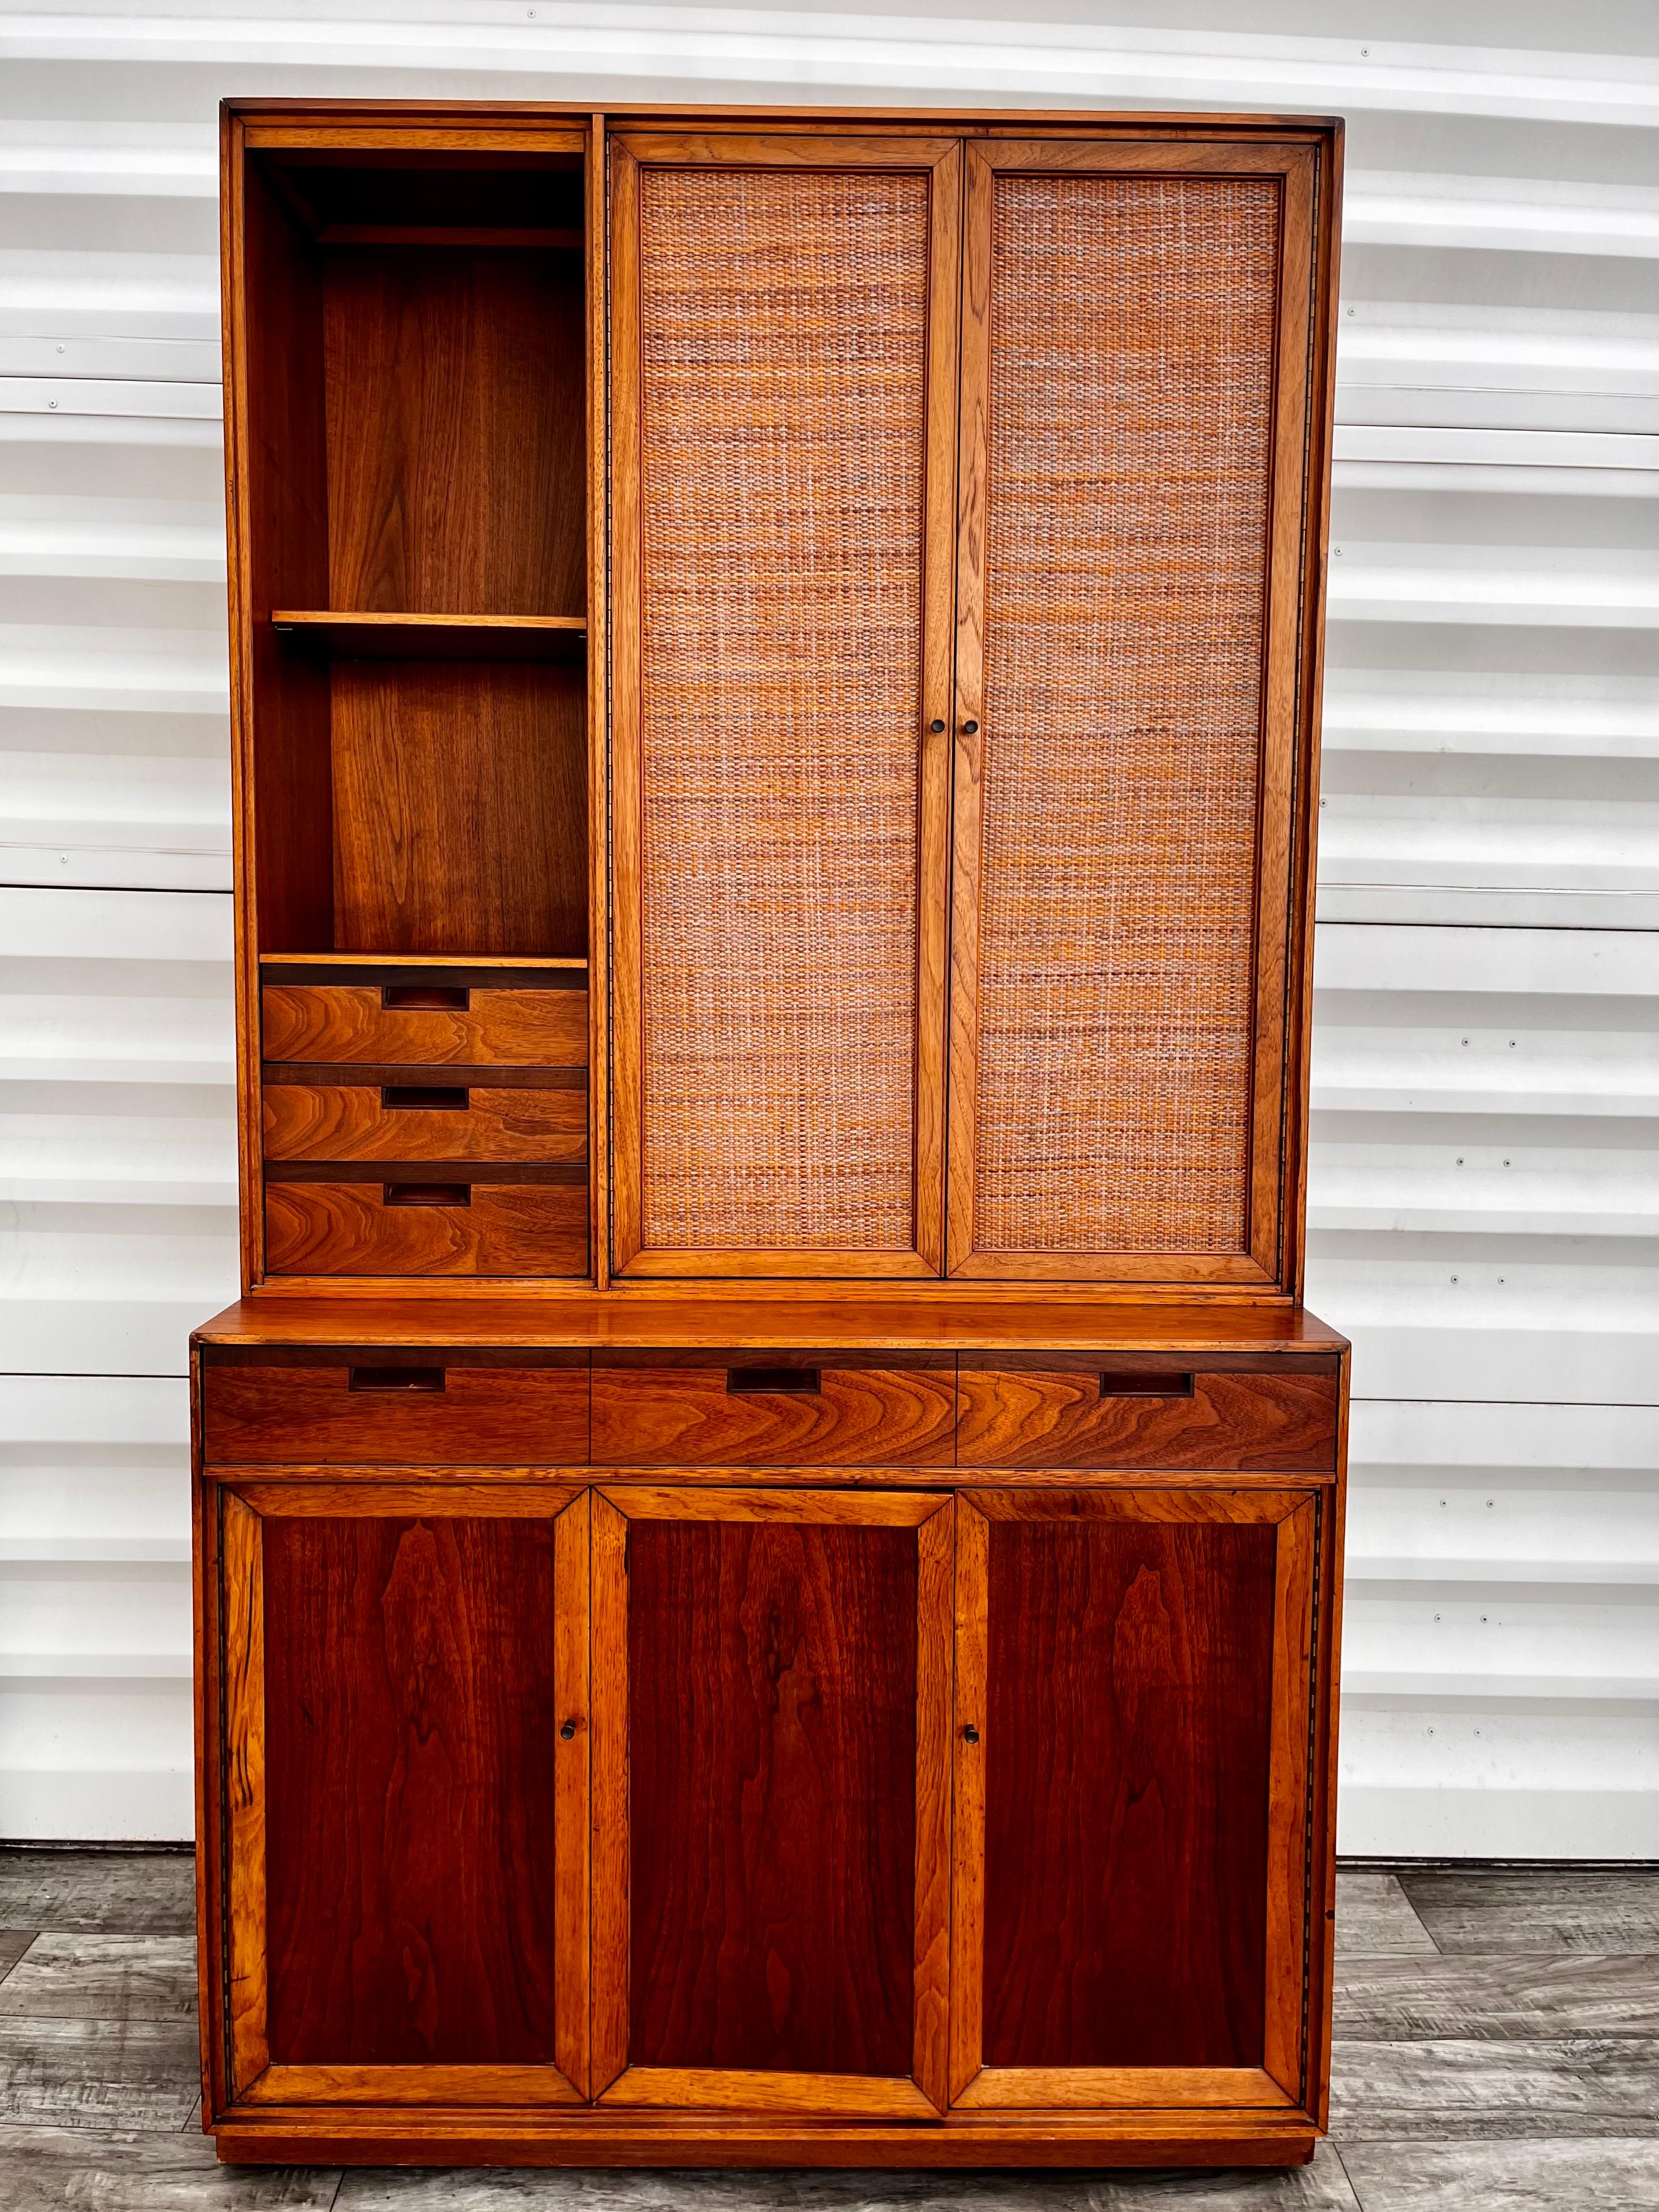 Vintage Mid-Century Modern secretary/ wall unit cabinet in the John Stuart's Janus Collection Style. Circa 1960s
Features a pull-out writing shelve surface hidden by a false front drawer, two top woven cane doors, three small drawers with dovetail